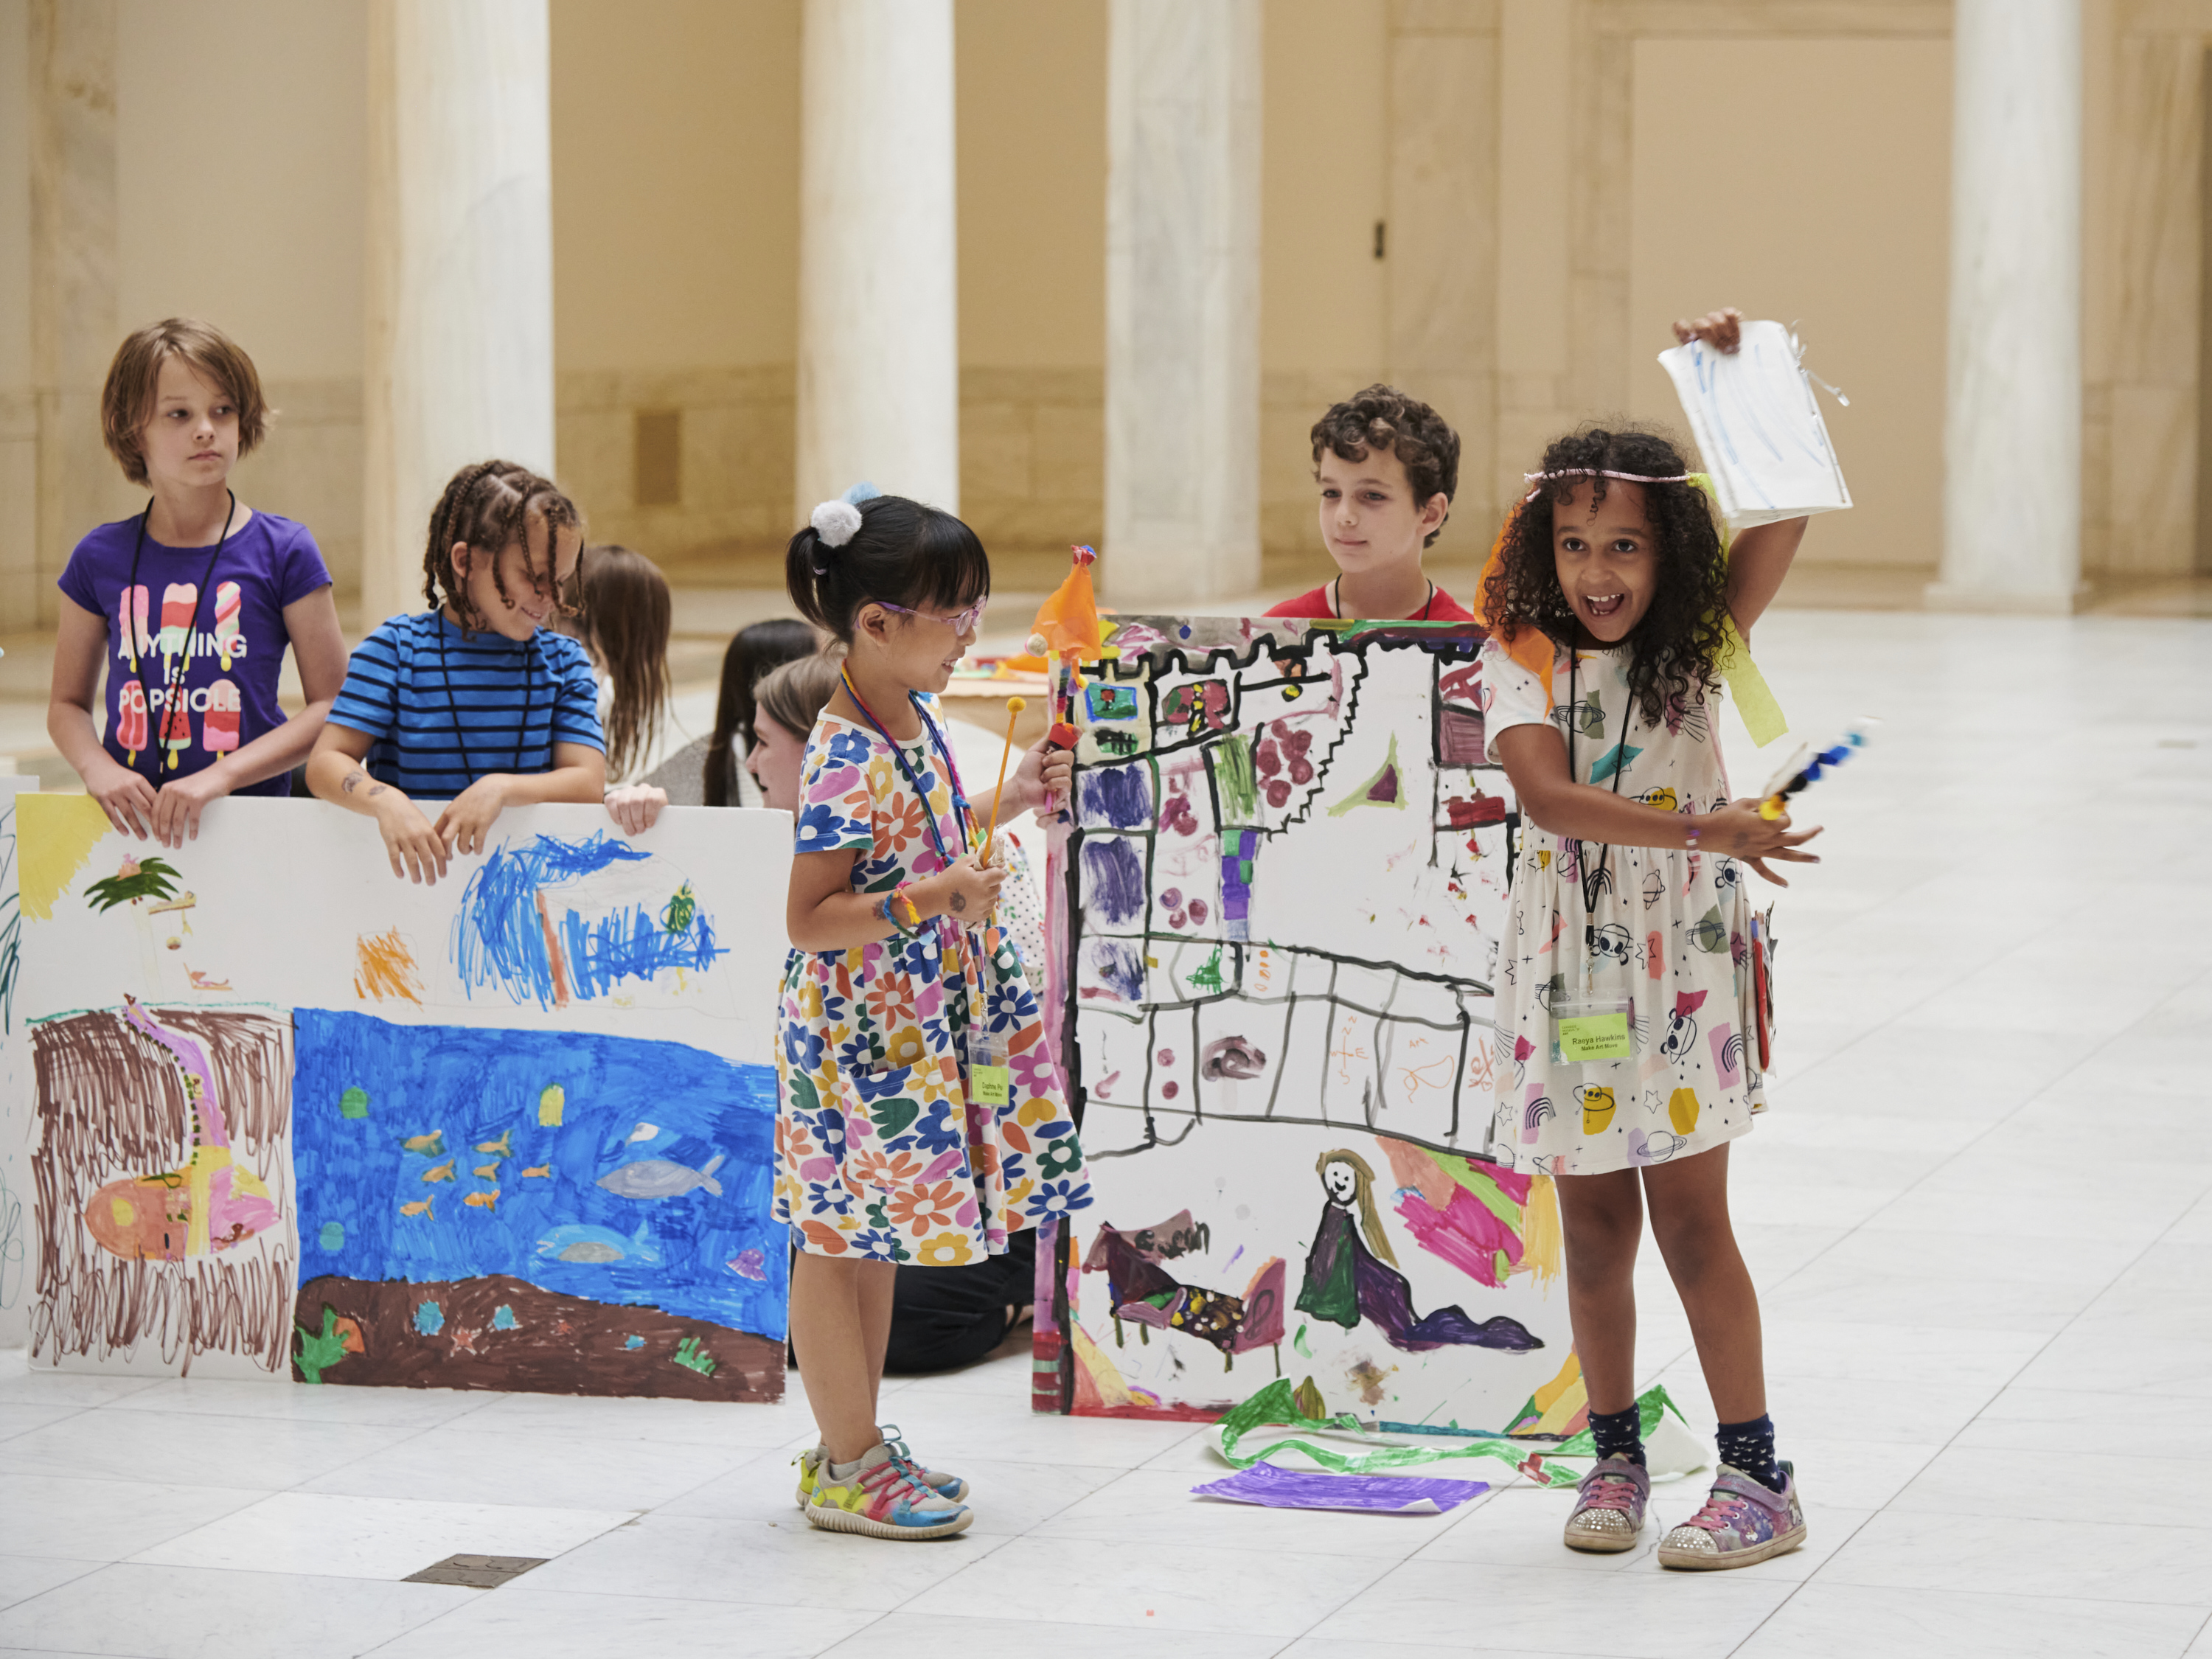 Kids hold up their art works